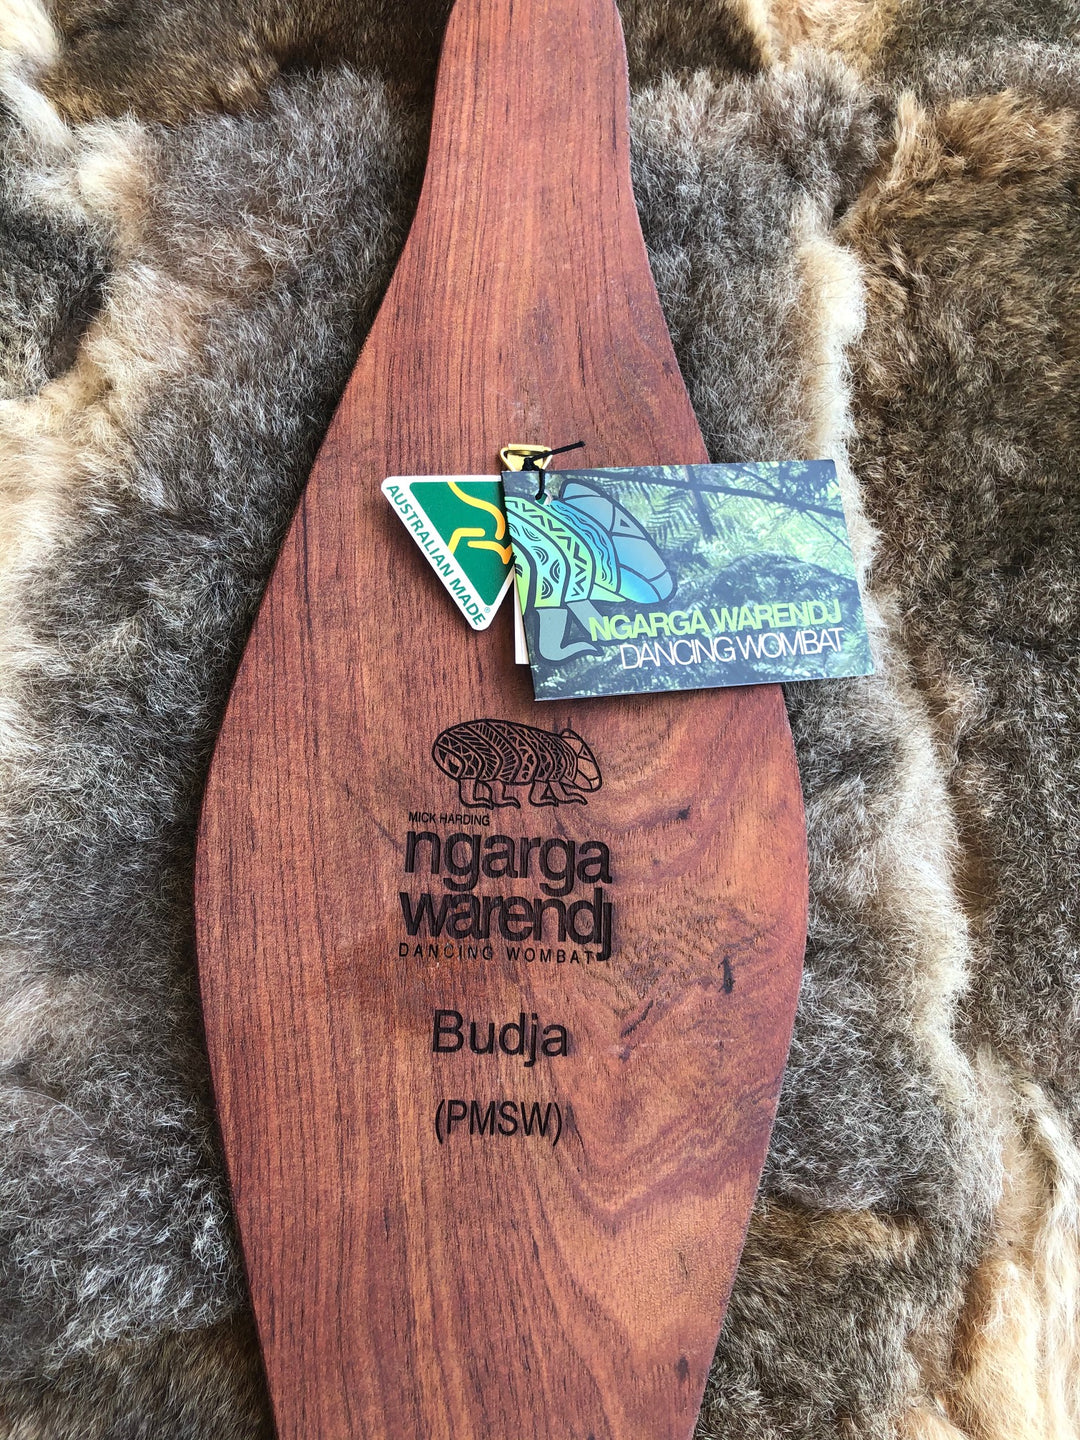 Parrying Malgarr Shield with Budja the Platypus Design.    Hand crafted in Australia from Australian Red Cedar timber. All artefacts come with an information card.   The card has information about the artist, artefact and design.   All designs are based on traditional symbols from South East Australia.